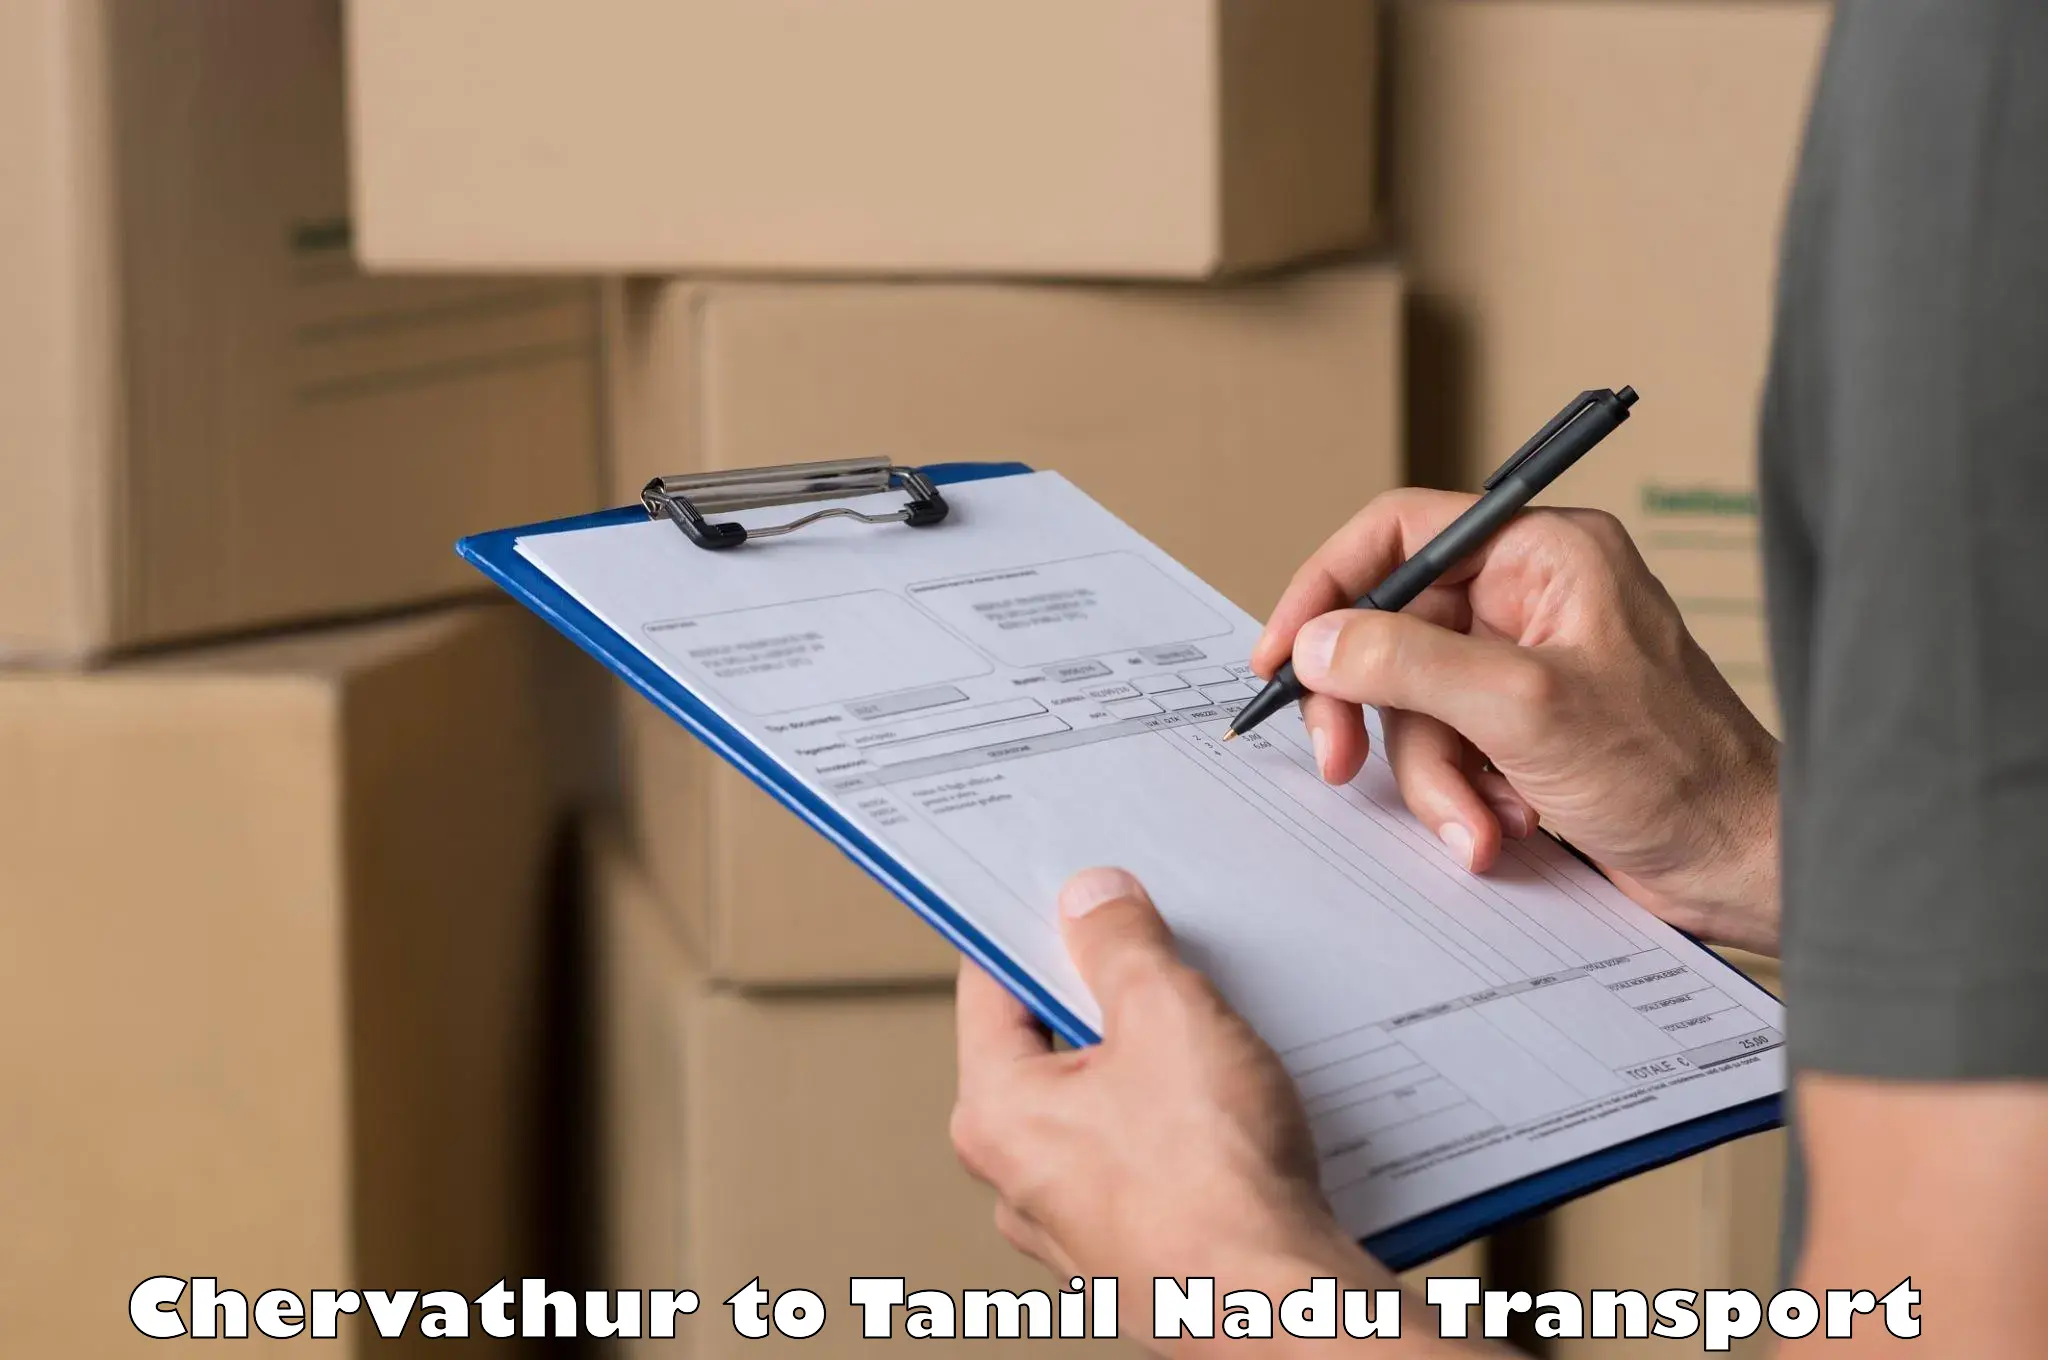 Nationwide transport services Chervathur to Meenakshi Academy of Higher Education and Research Chennai